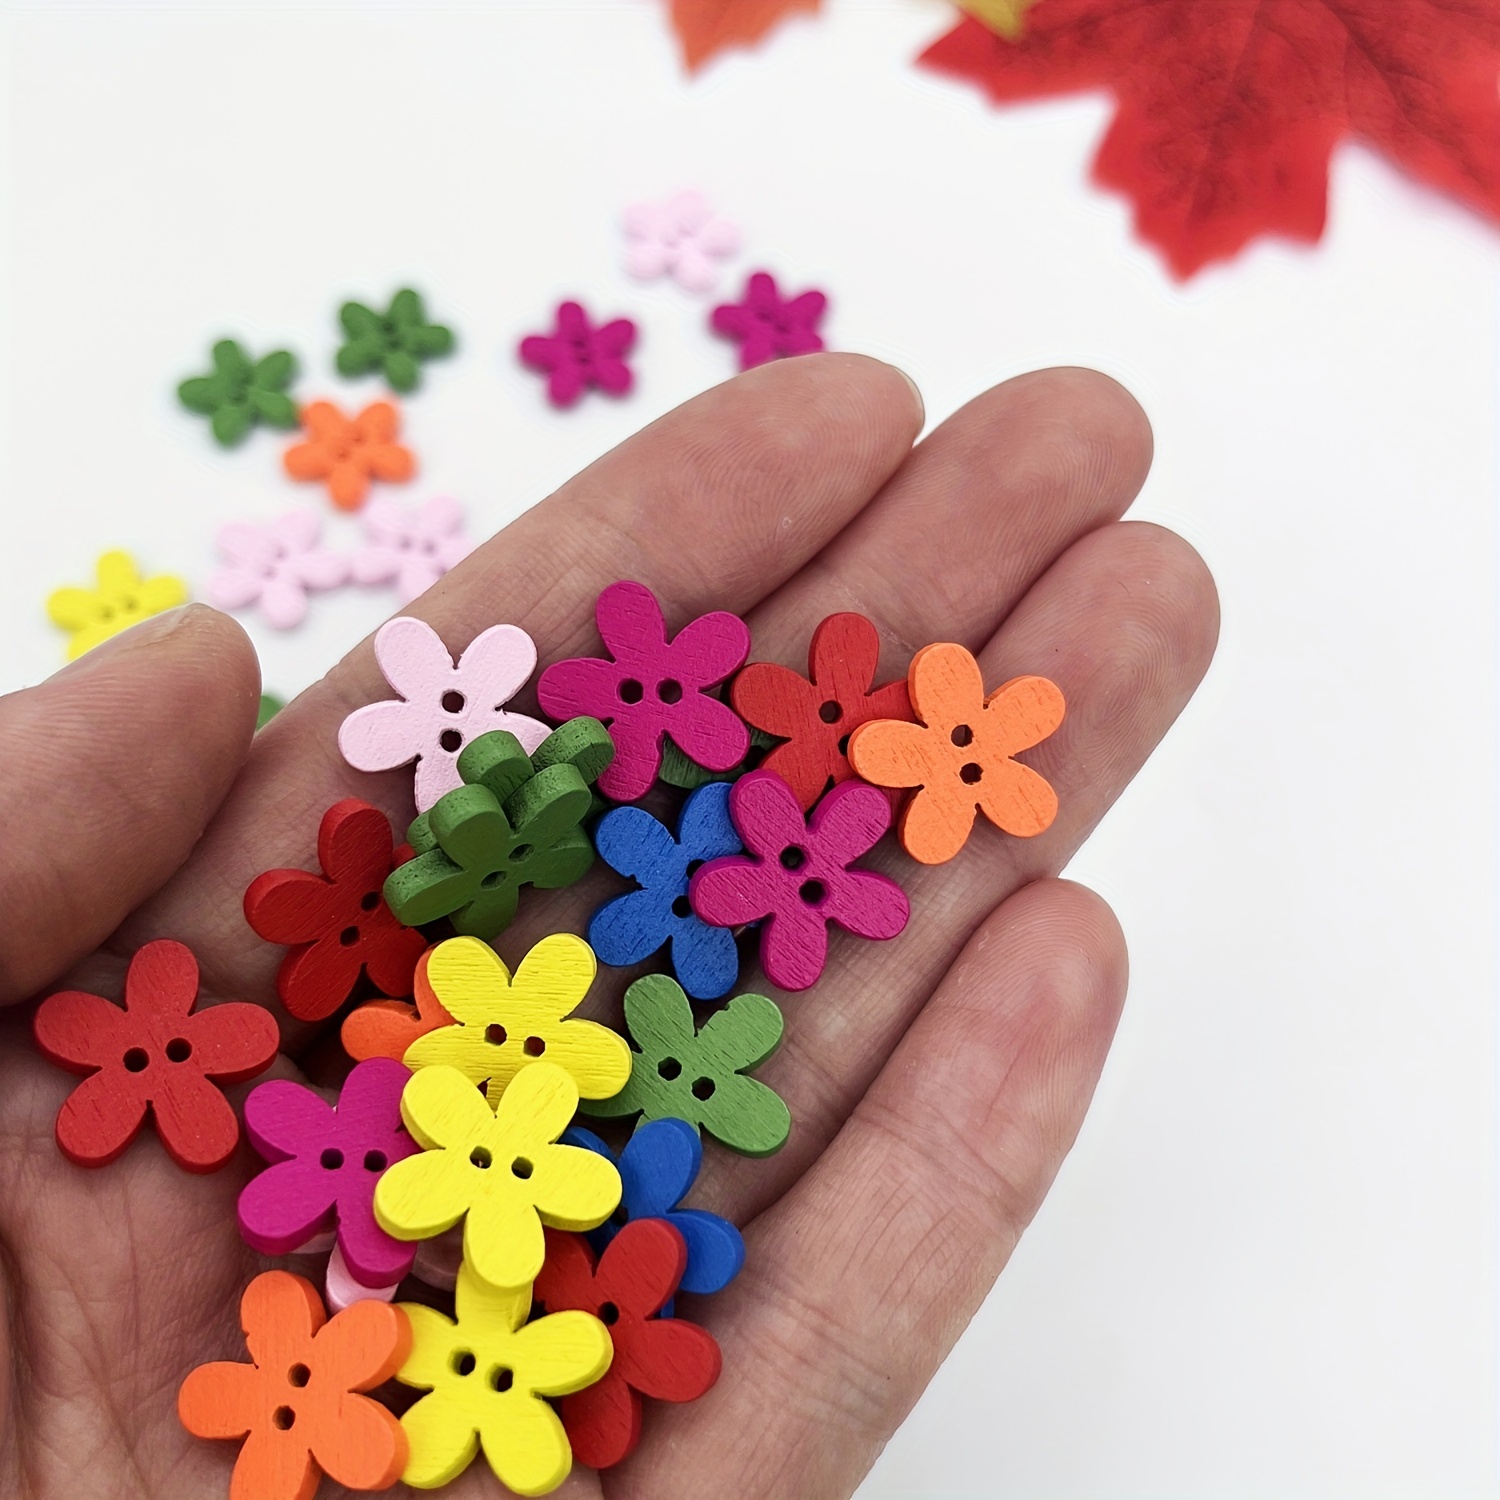 50pcs Natural Wooden Flower Buttons - Add Colorful Creativity to Your DIY  Sewing Projects!